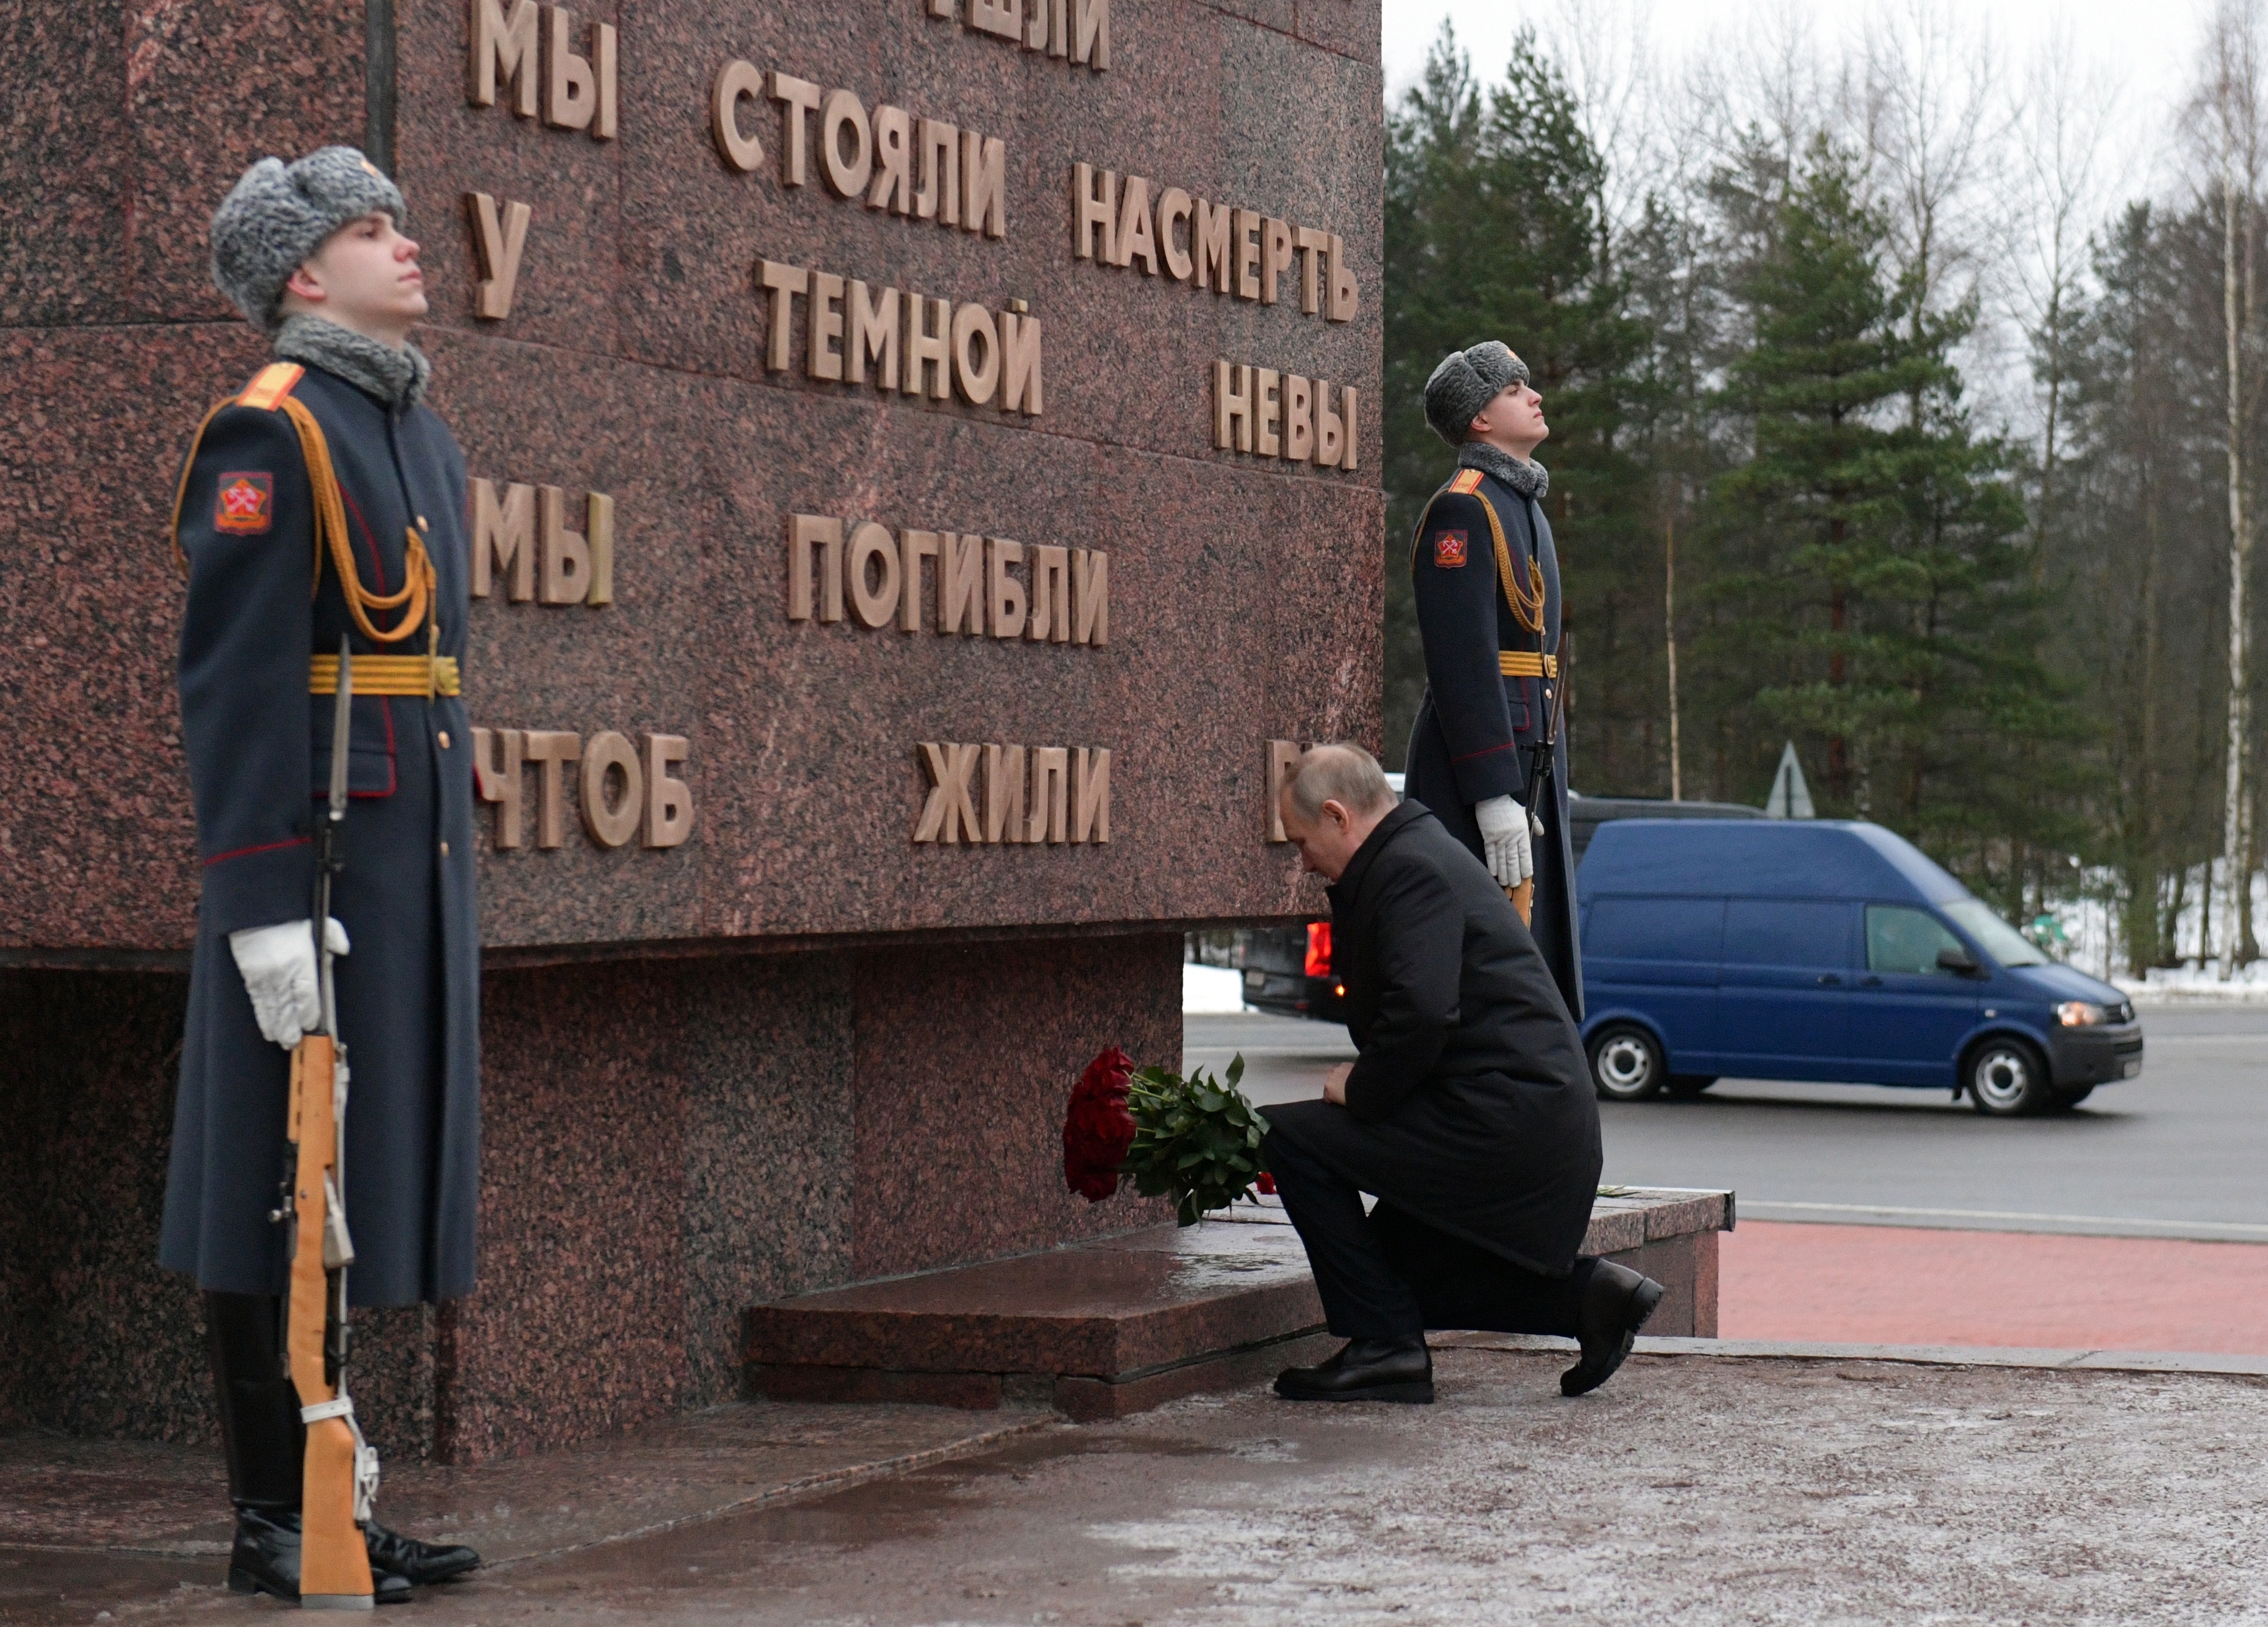 Russian President Vladimir Putin attends a wreath-laying ceremony at the monument "Rubezhny Kamen", (Boundary Stone) marking the 80th anniversary of the break of Nazi's siege of Leningrad, (now St. Petersburg) during the World War Two in Kirovsk, 30 km east of St. Petersburg, Russia, Wednesday, Jan. 18, 2023.  